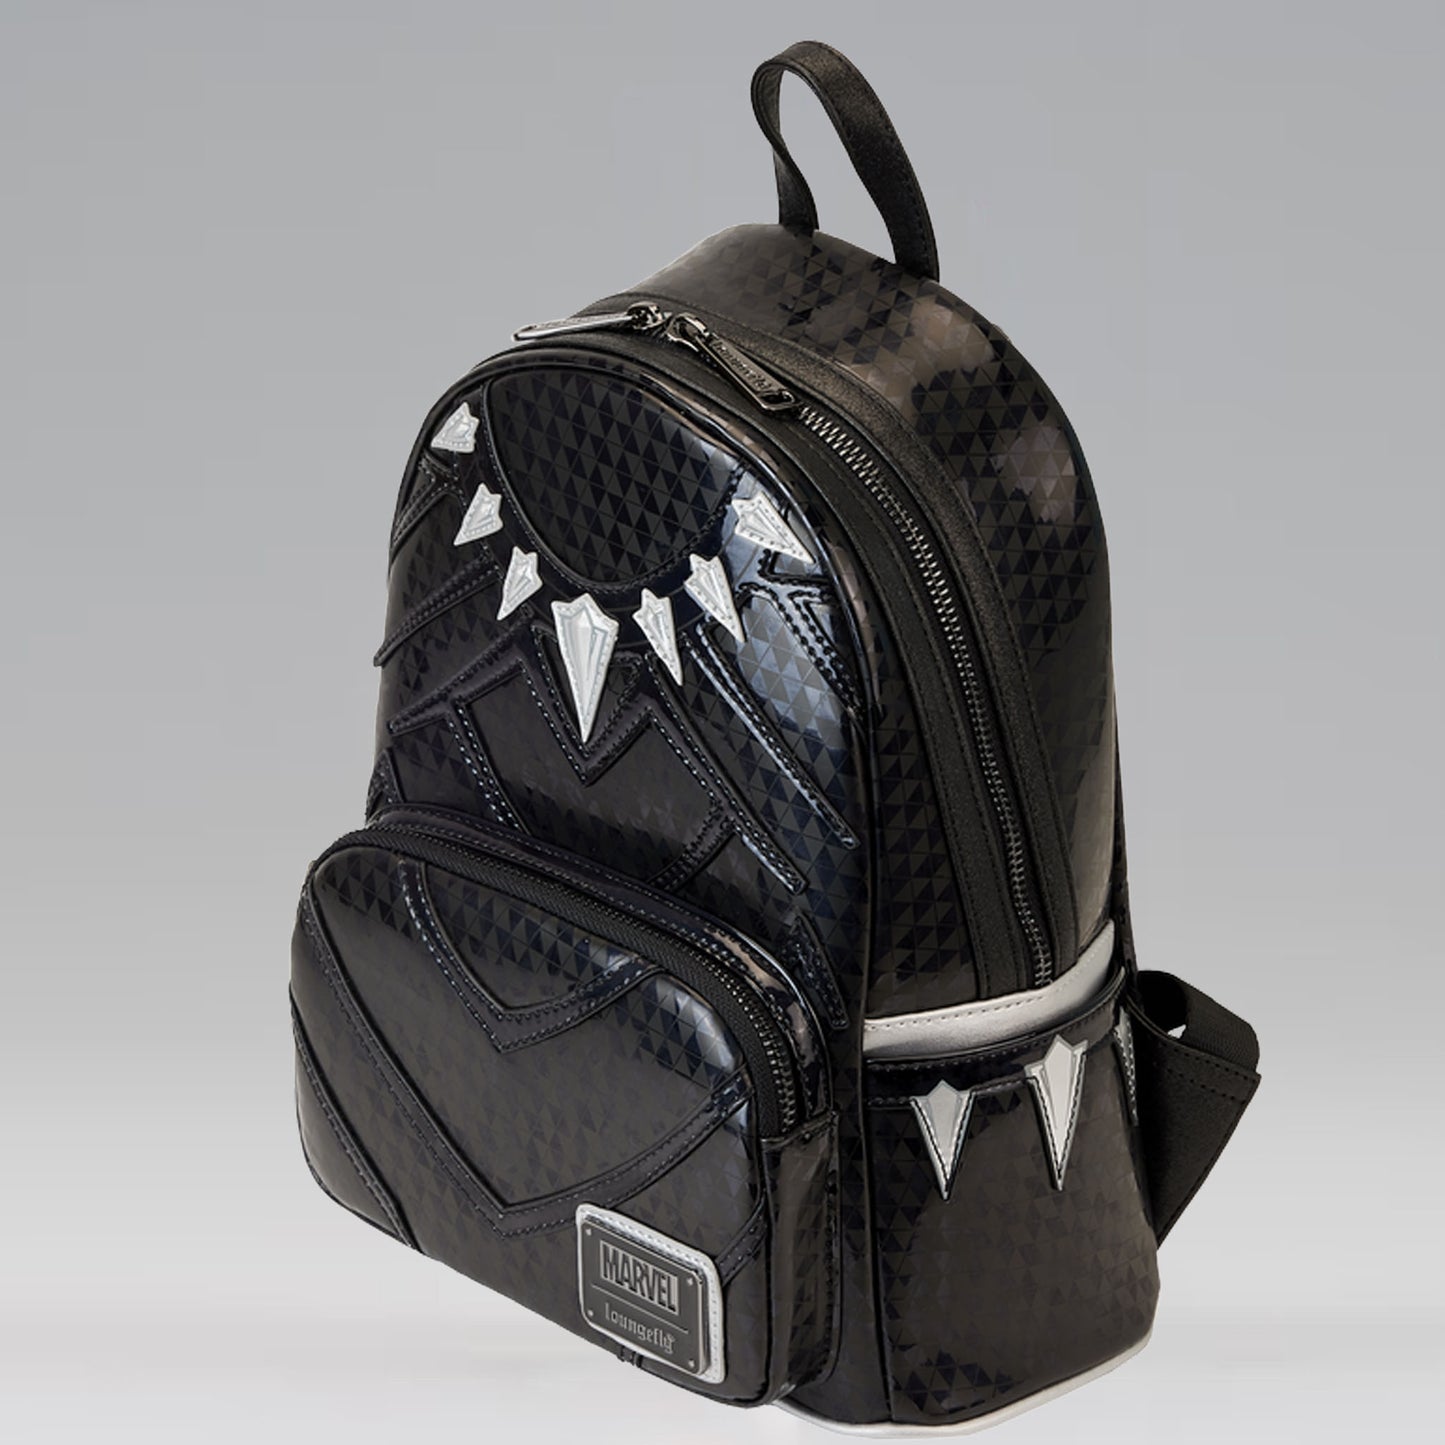 Black Panther (Marvel) Metallic Cosplay Mini Backpack by Loungefly